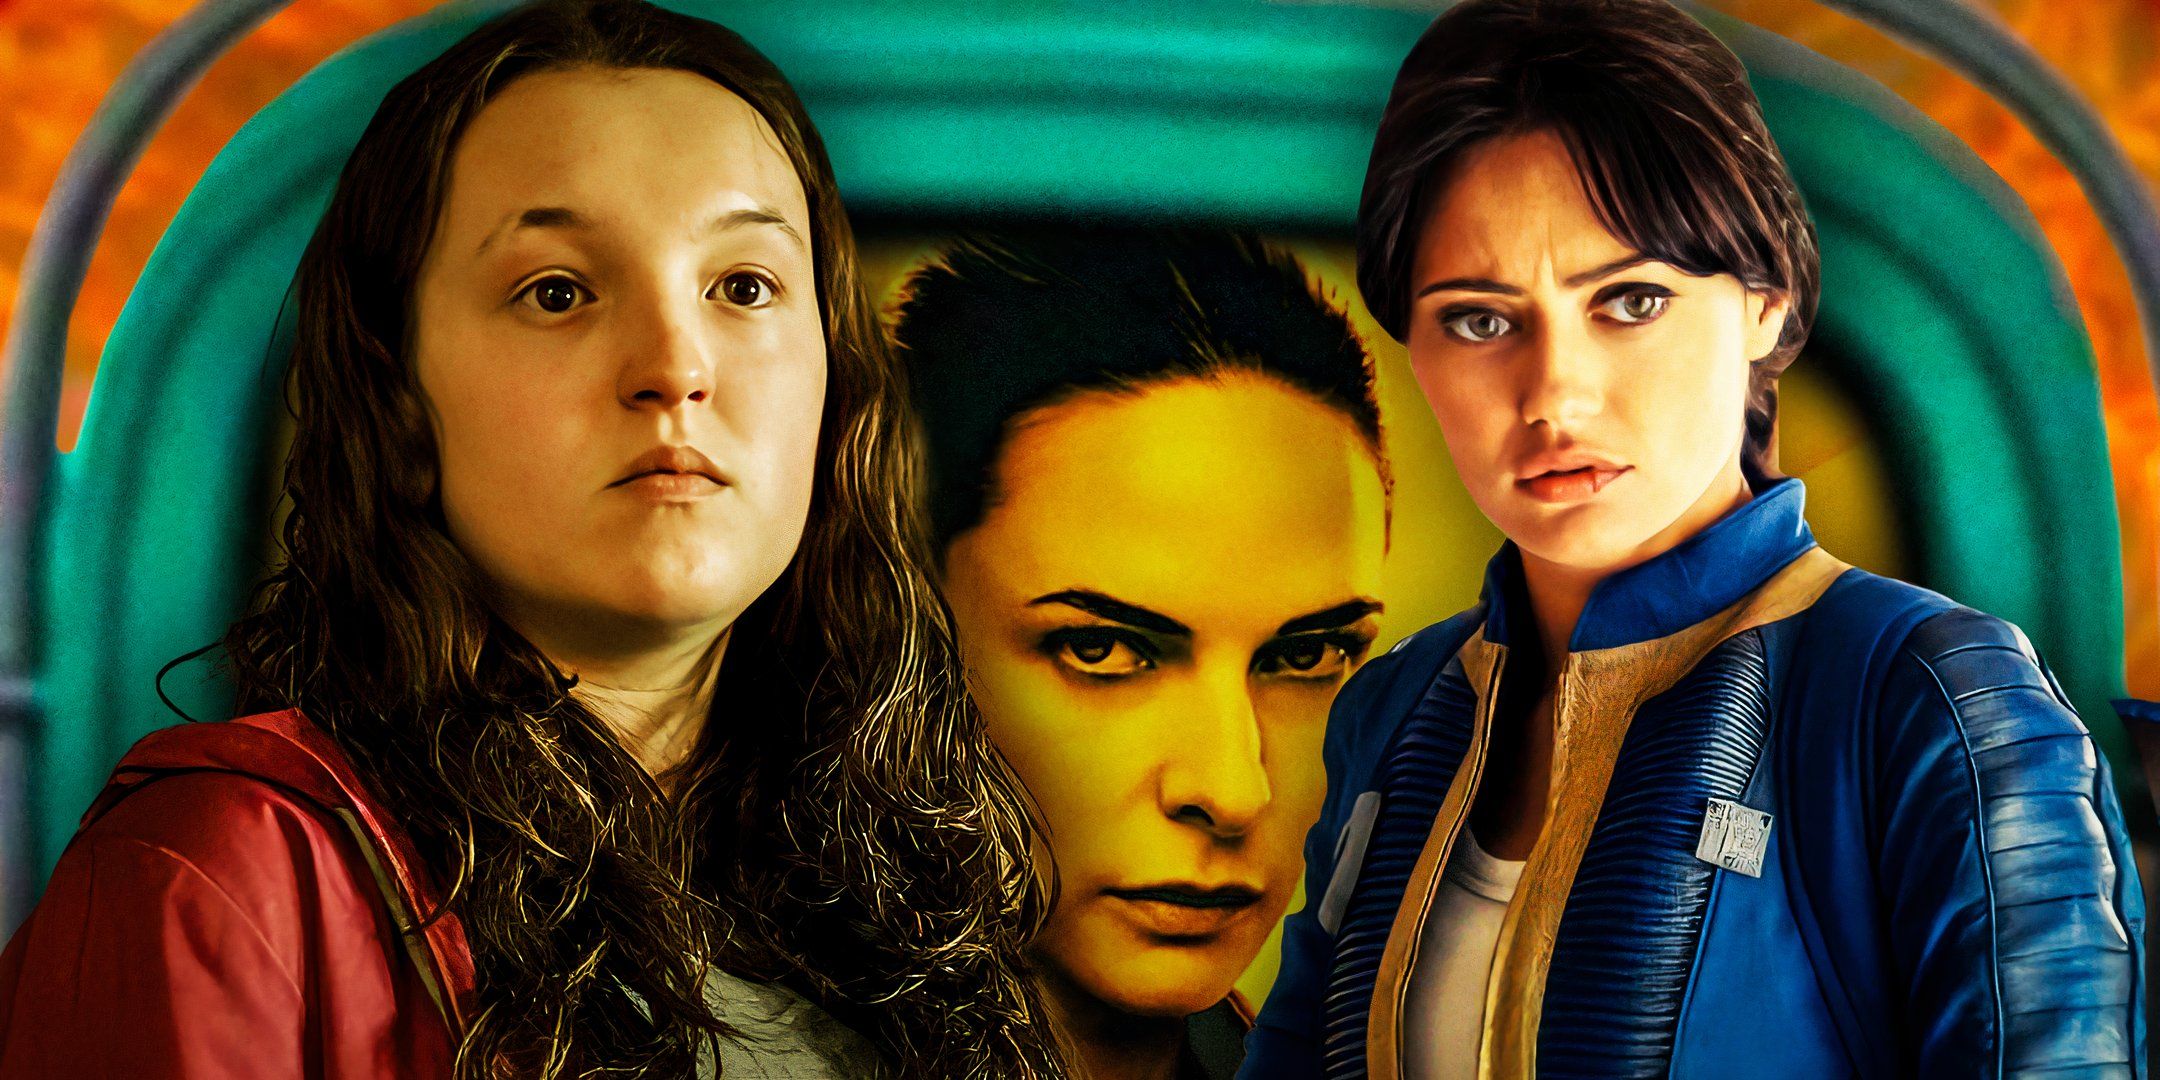 Bella Ramsey as Ellie Williams from The Last of Us, Rebecca Ferguson as Juliette in Silo, and Ella Purnell as Lucy MacLean from Fallout